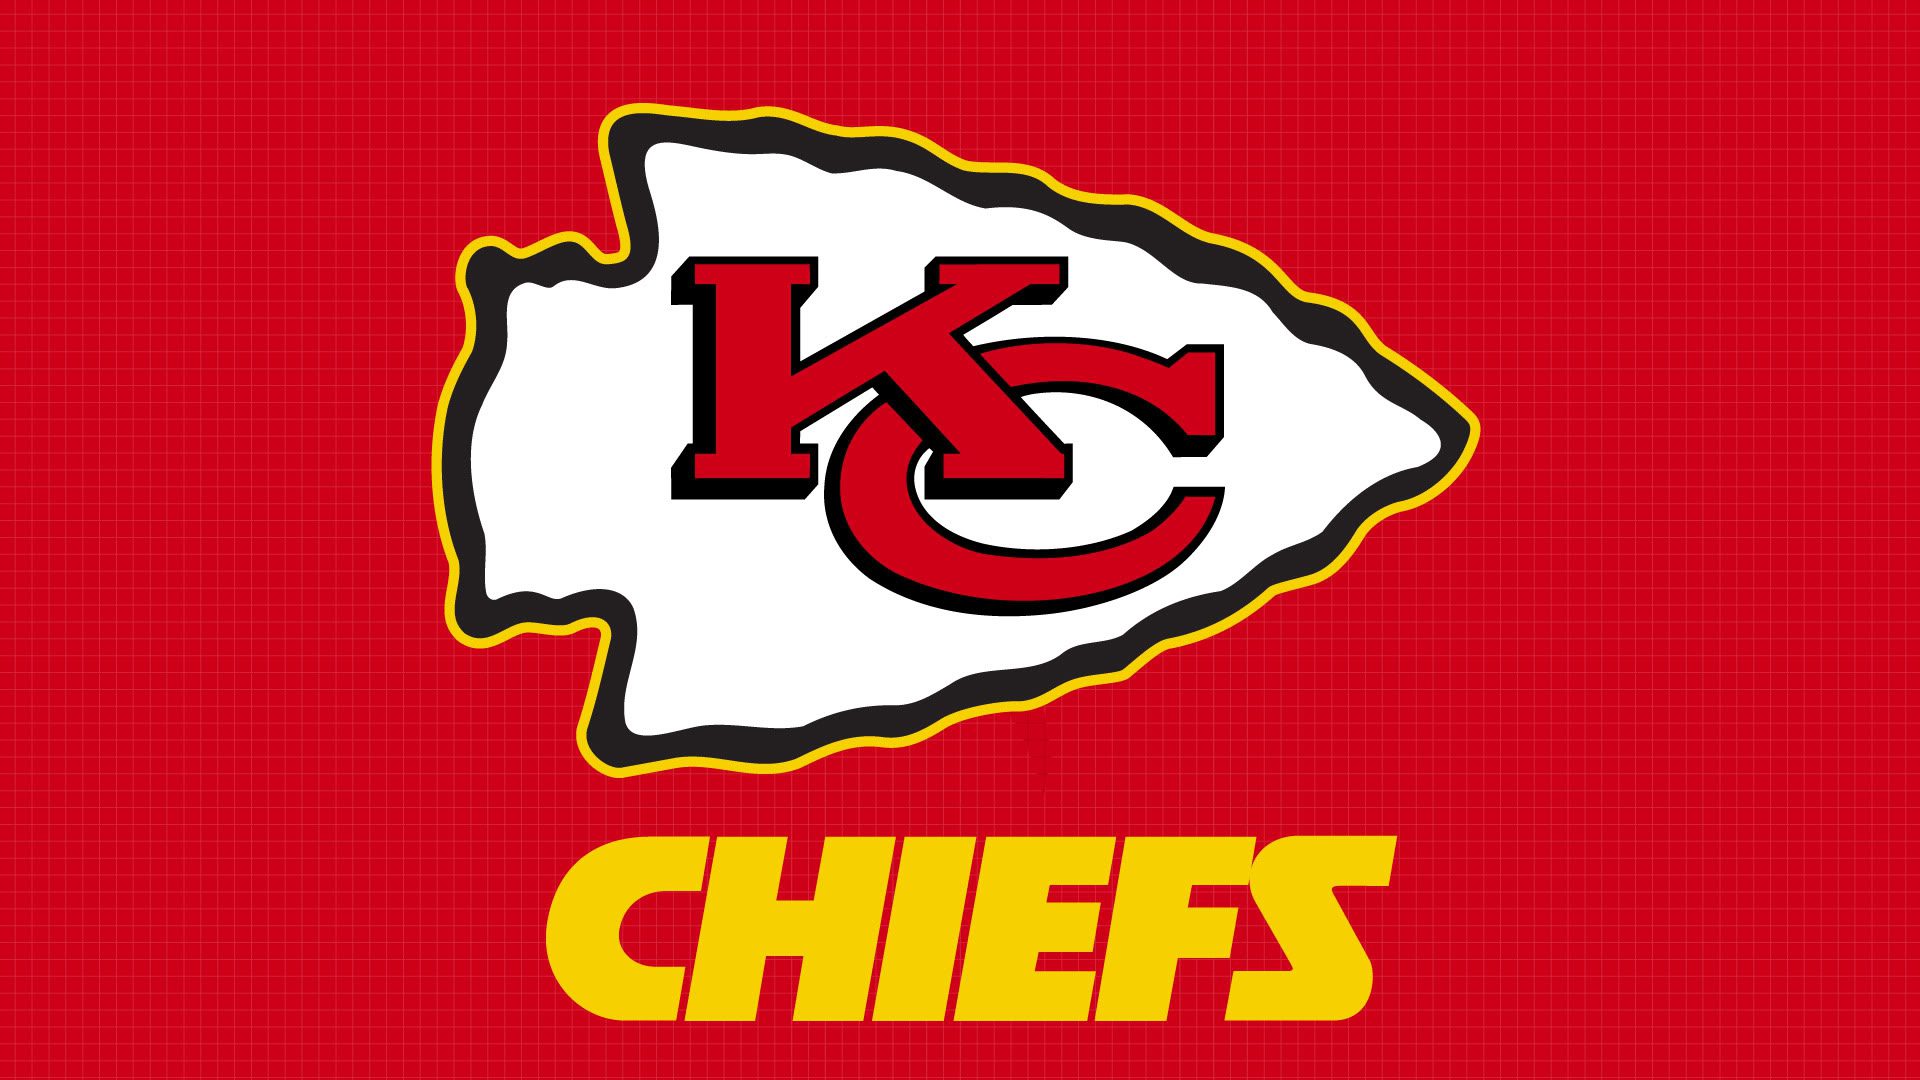 A red and yellow kansas city chiefs logo.